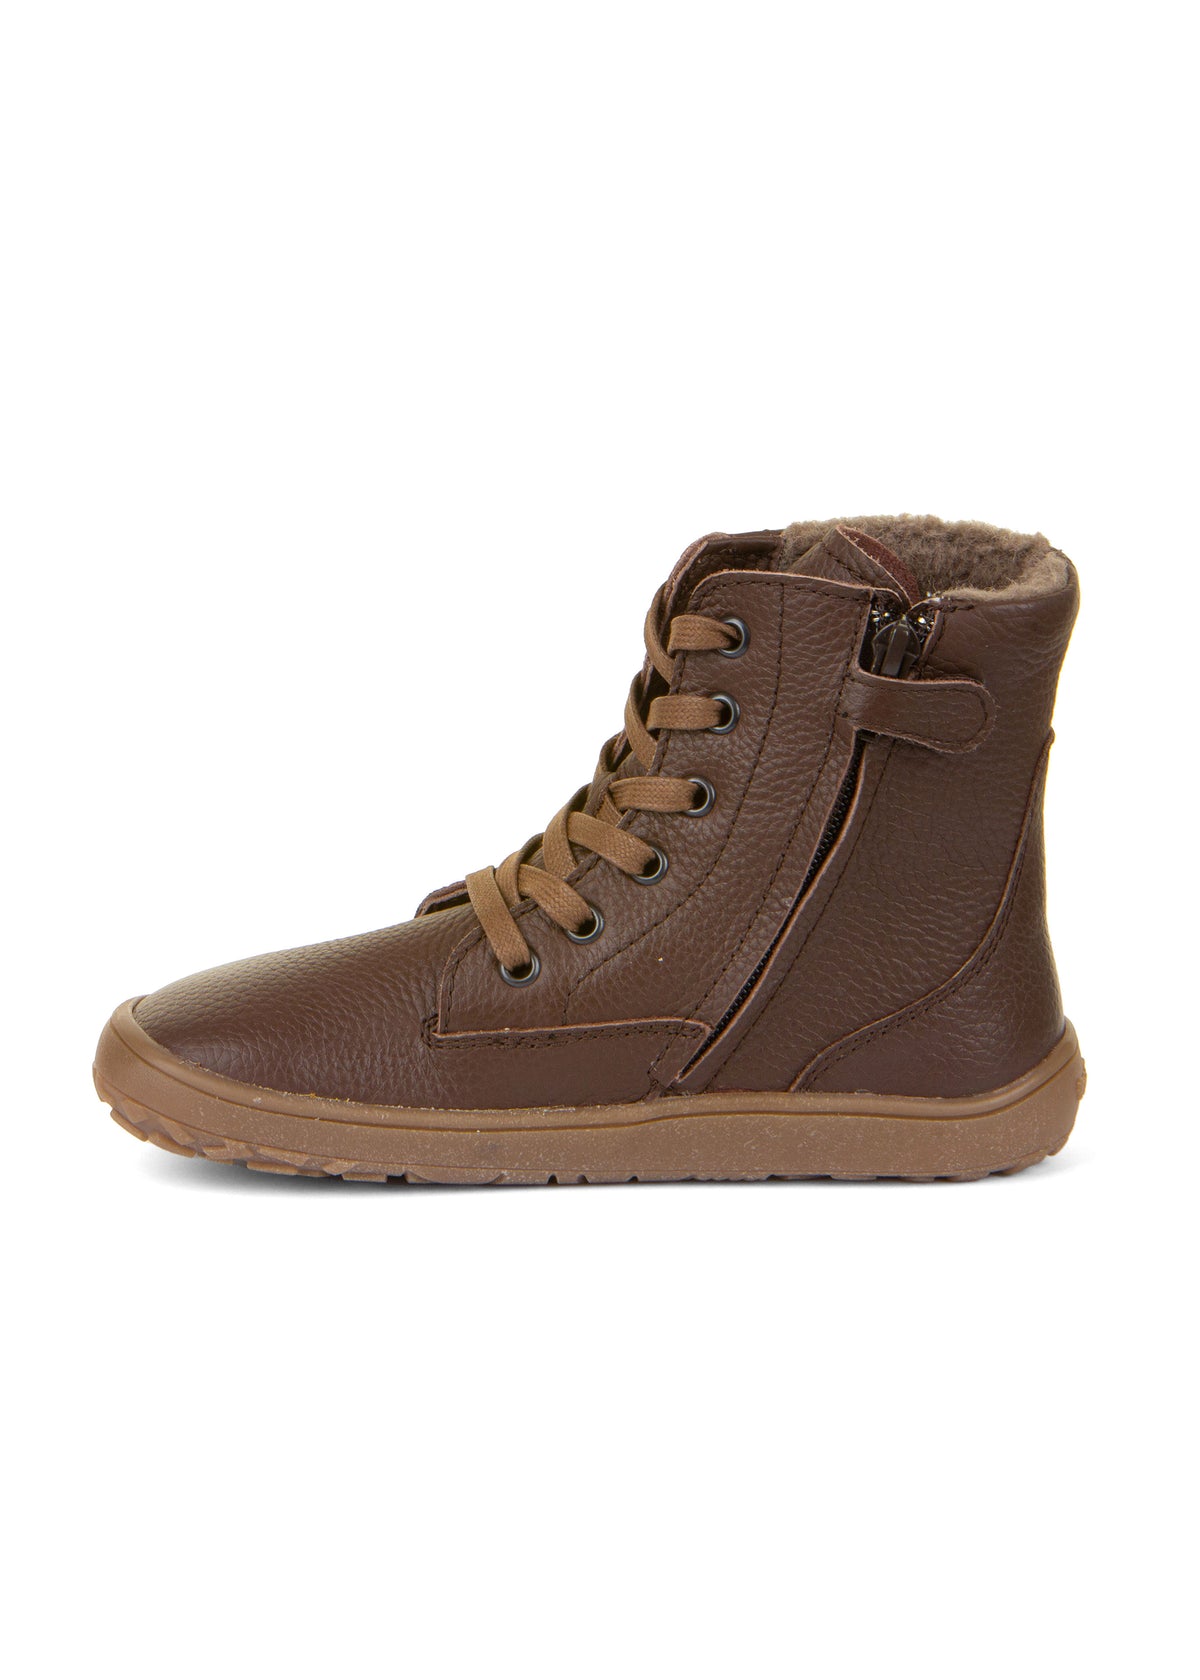 Barefoot shoes - leather winter shoes, TEX Laces - brown